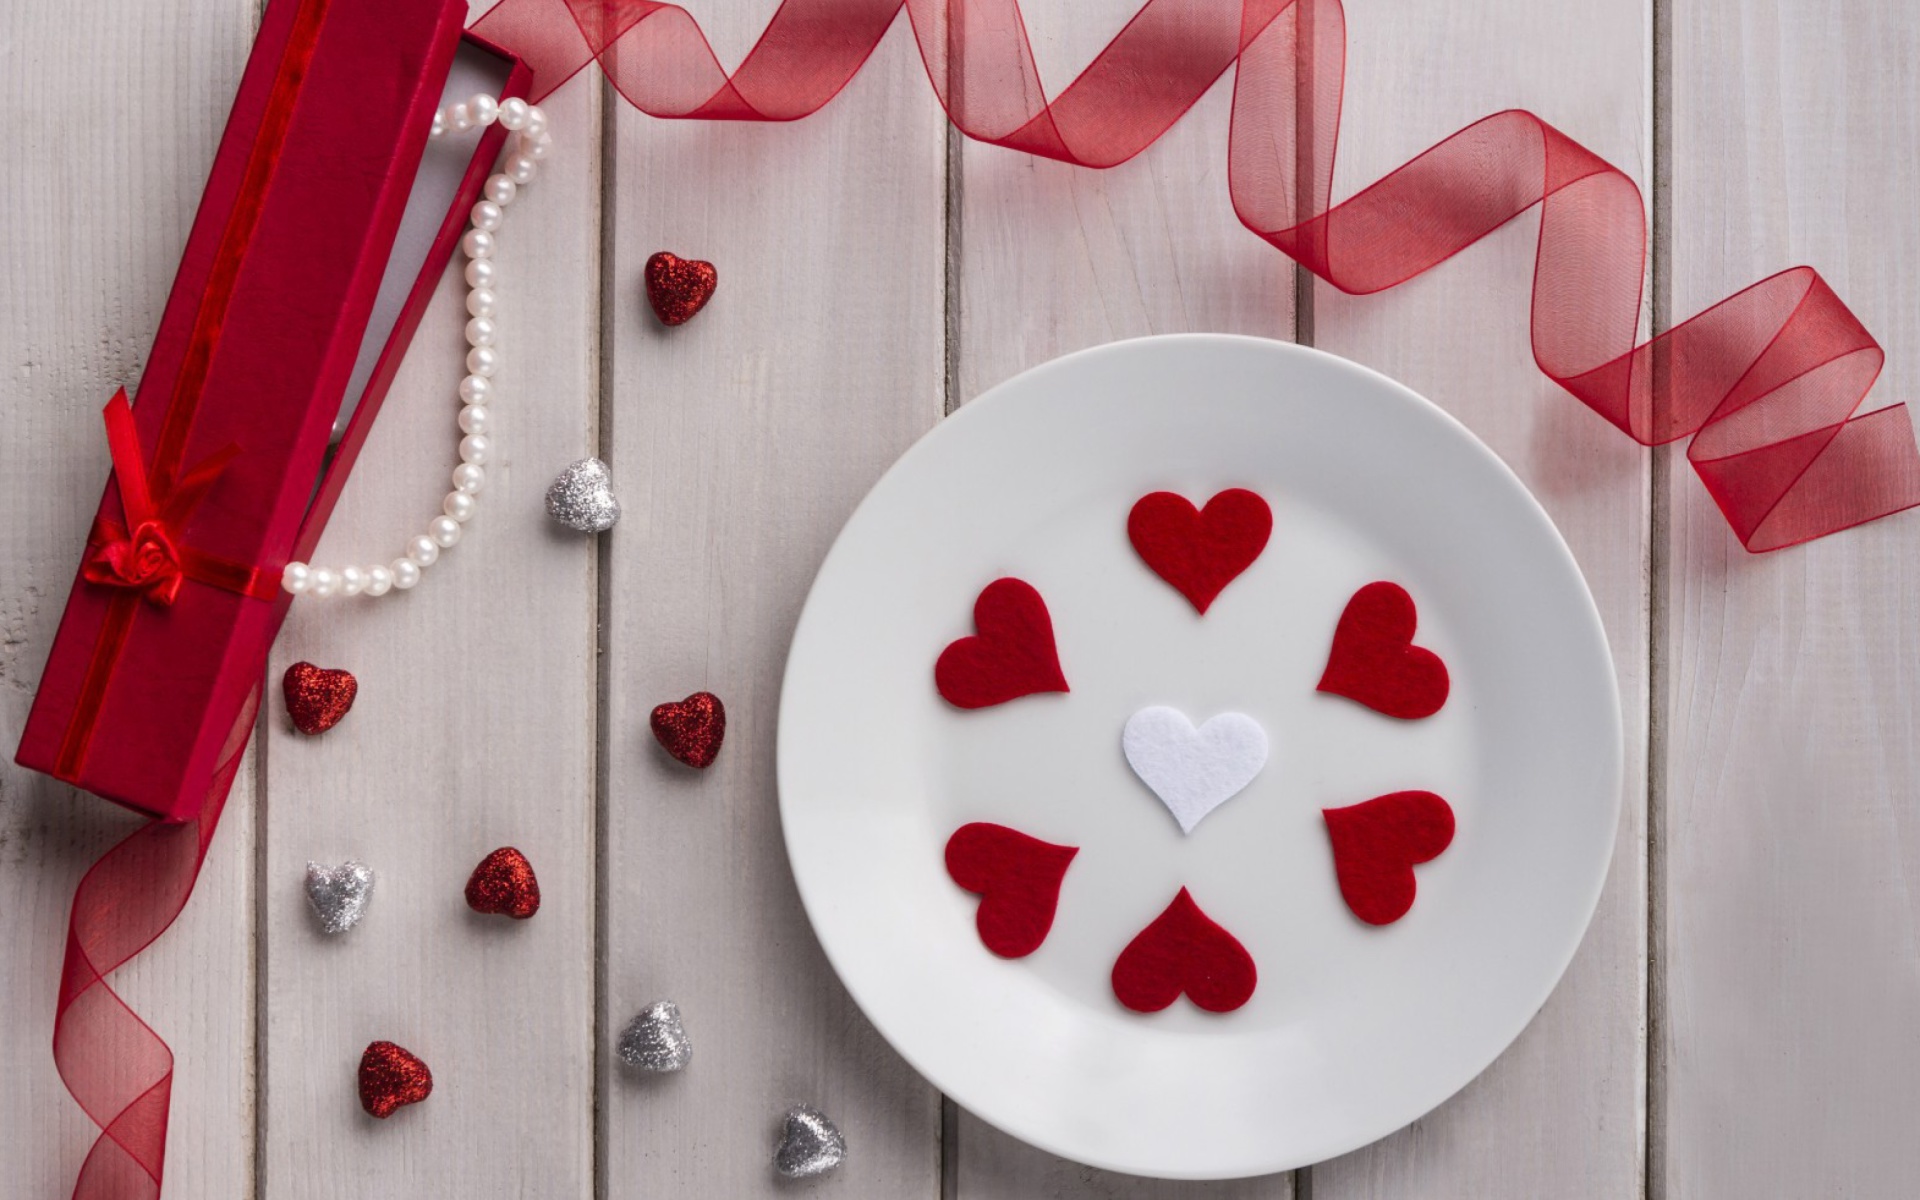 Romantic Valentines Day Table Settings wallpaper 1920x1200